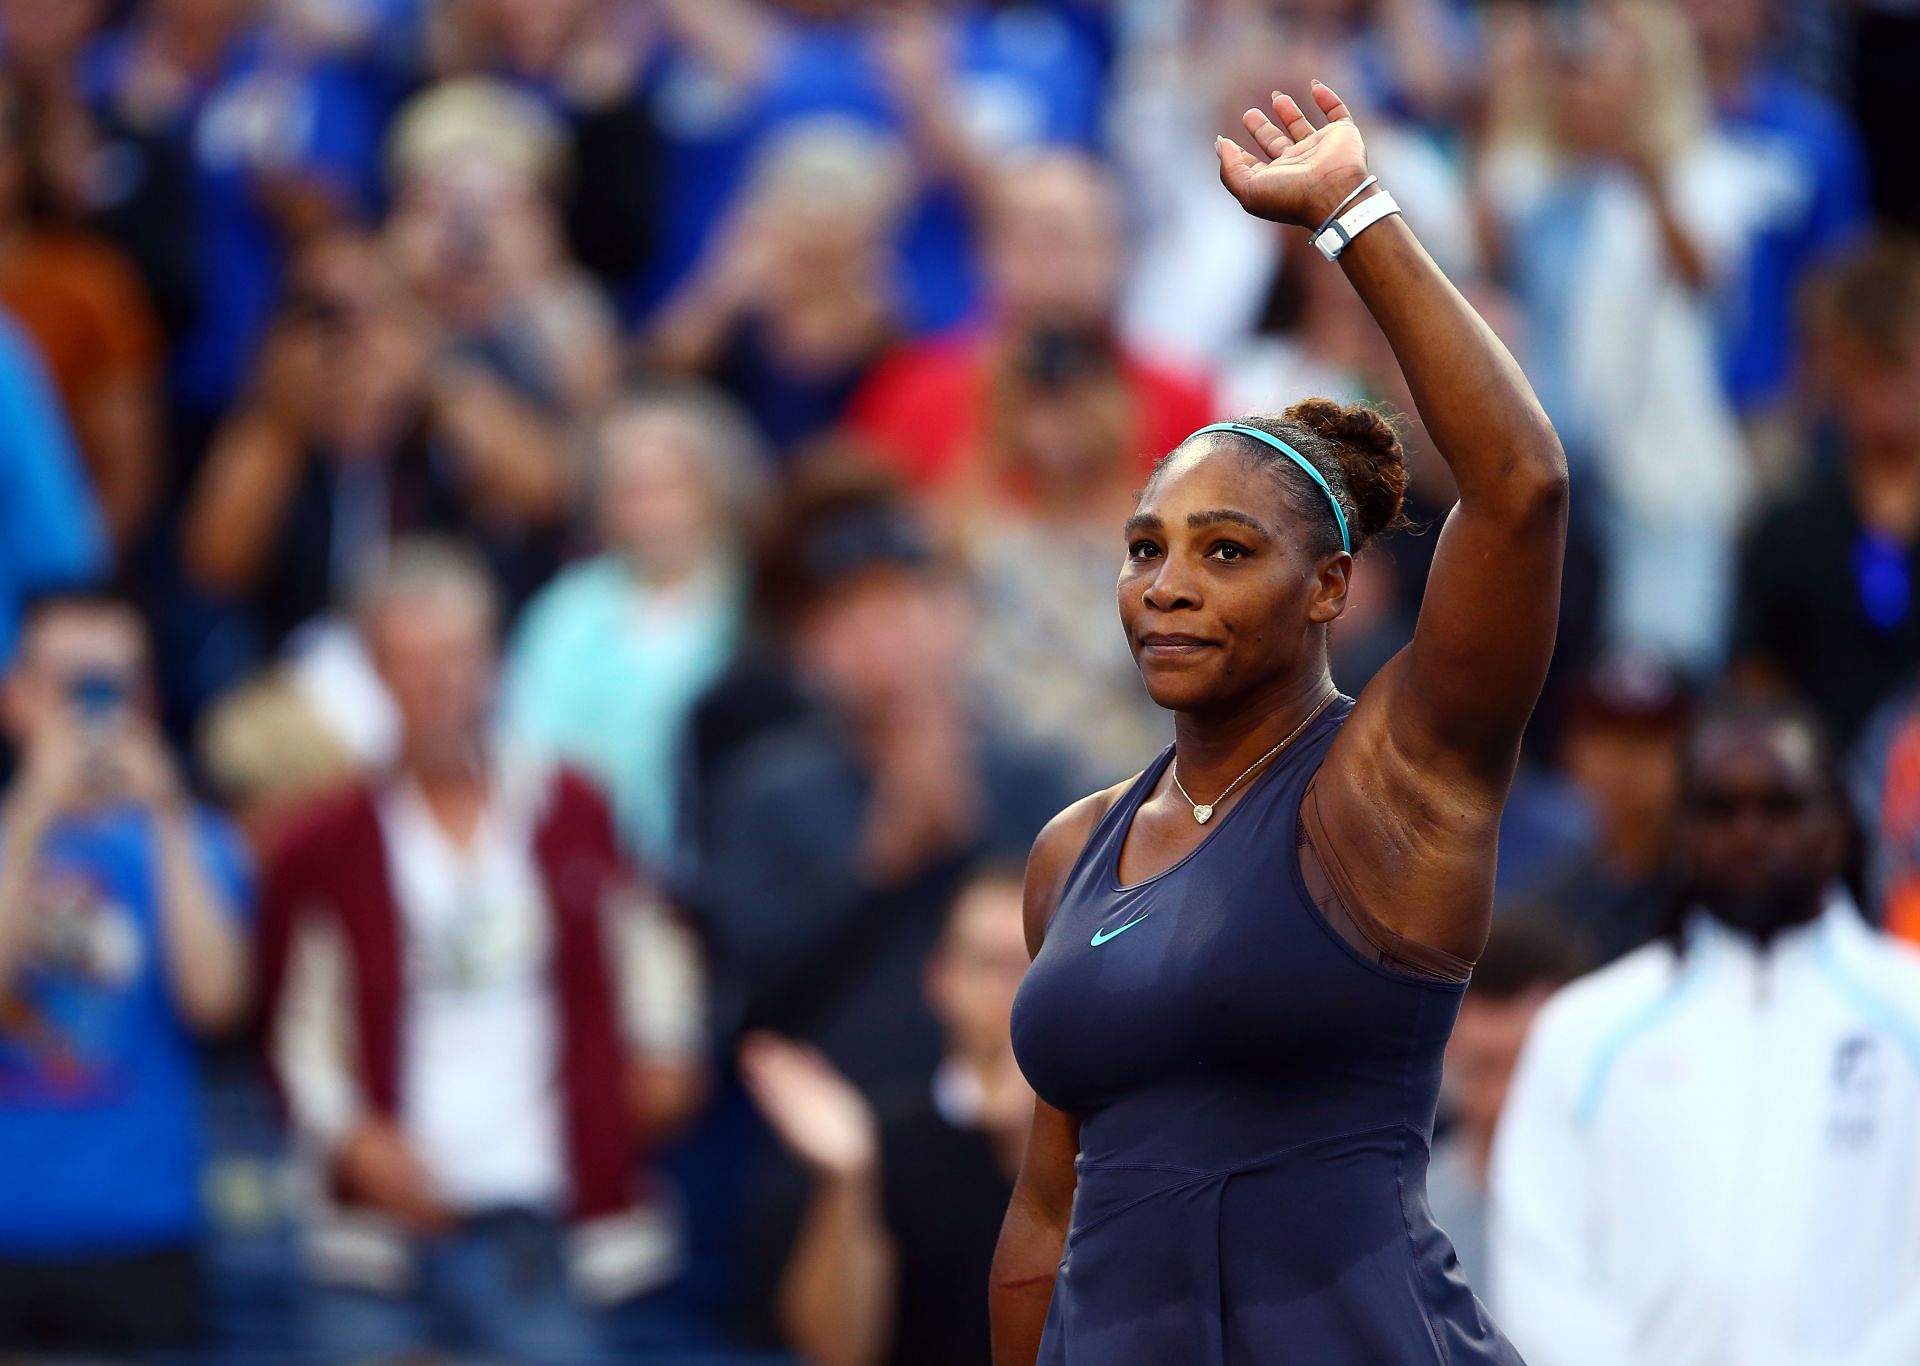 Serena Williams will compete at the National Bank Open